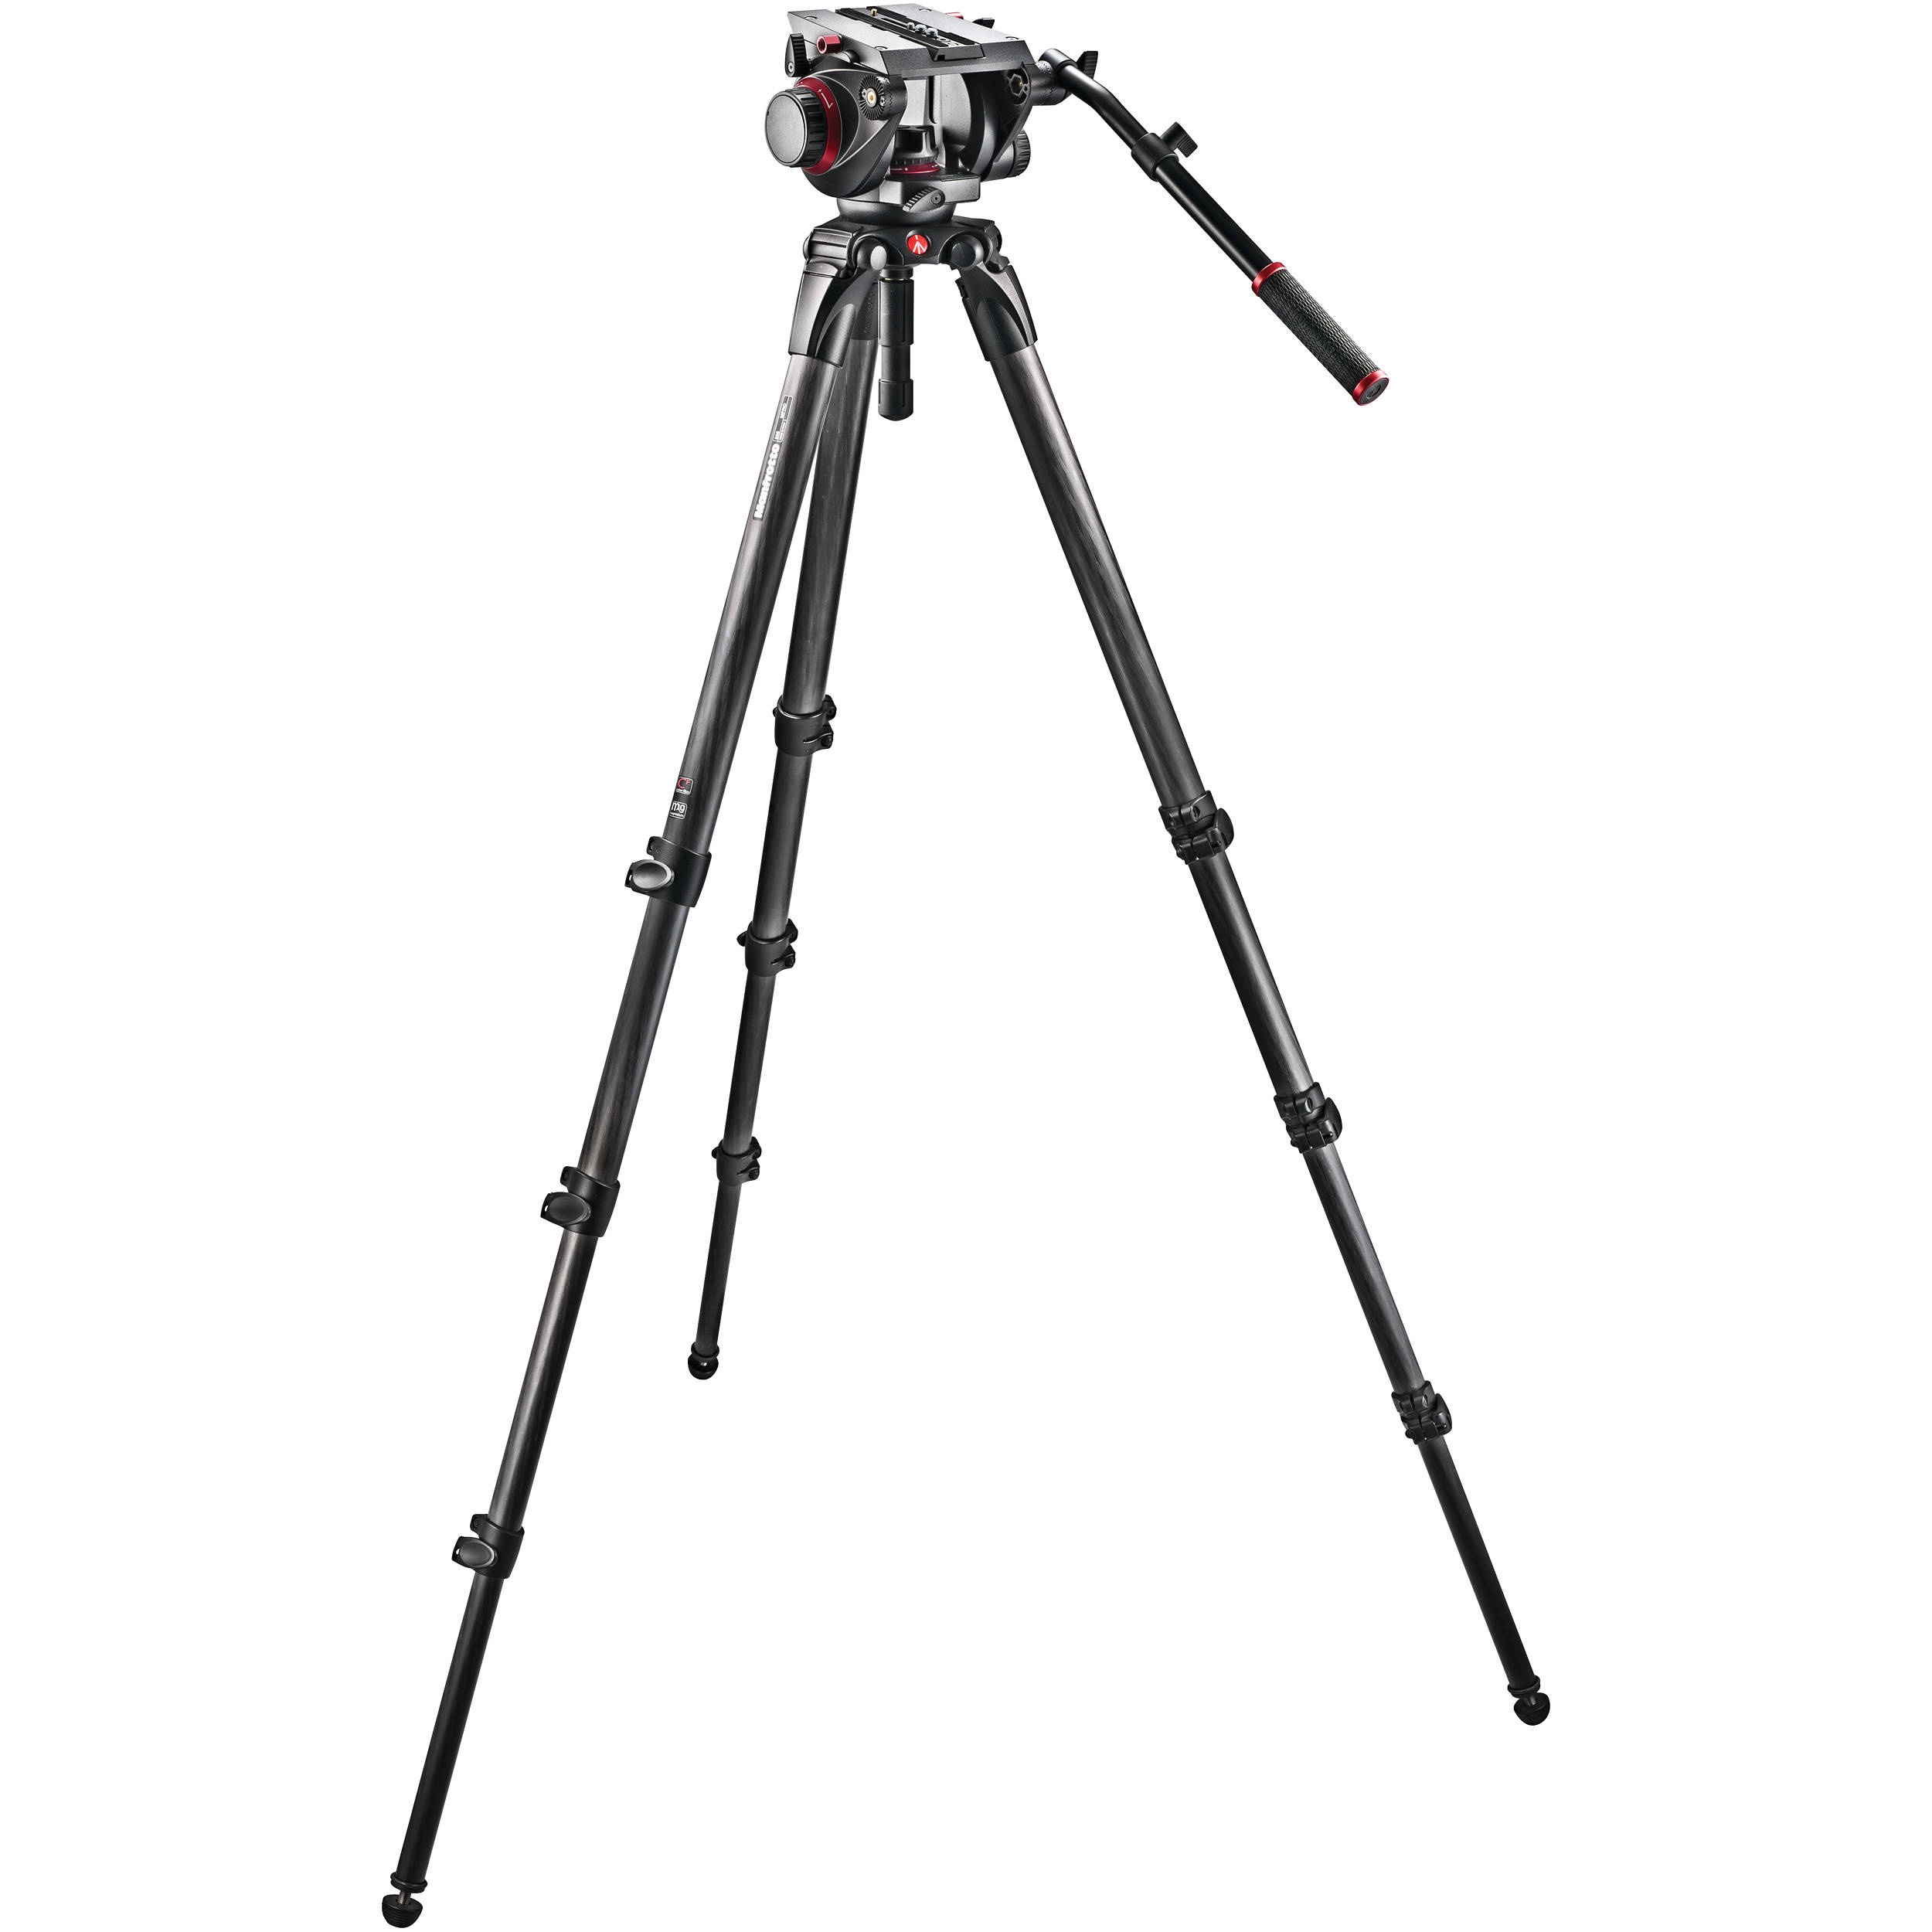 Manfrotto 536 Carbon Fiber Tripod with 509HD Video Head and Padded Carry Bag